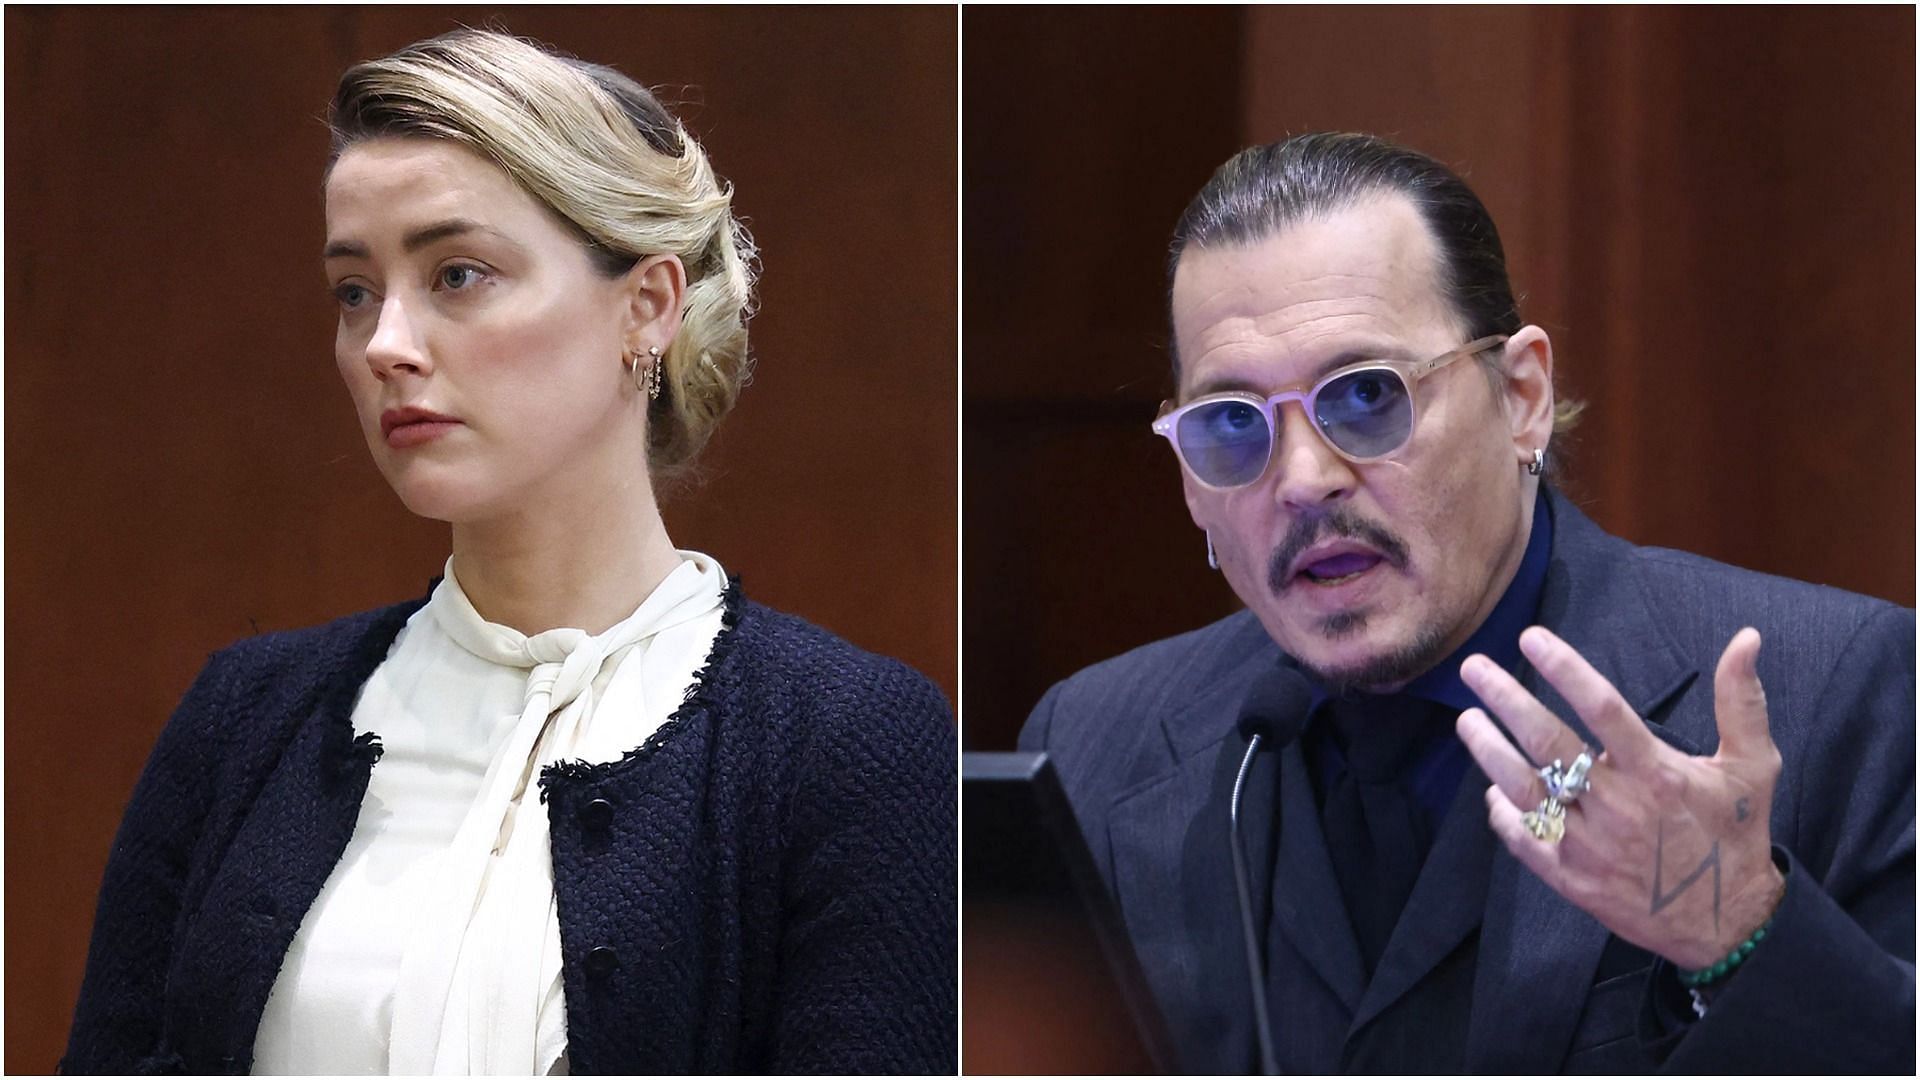 Amber Heard and Johnny Depp in the court (Image via Jim Lo Scalzo/POOL/AFP/Getty Images)